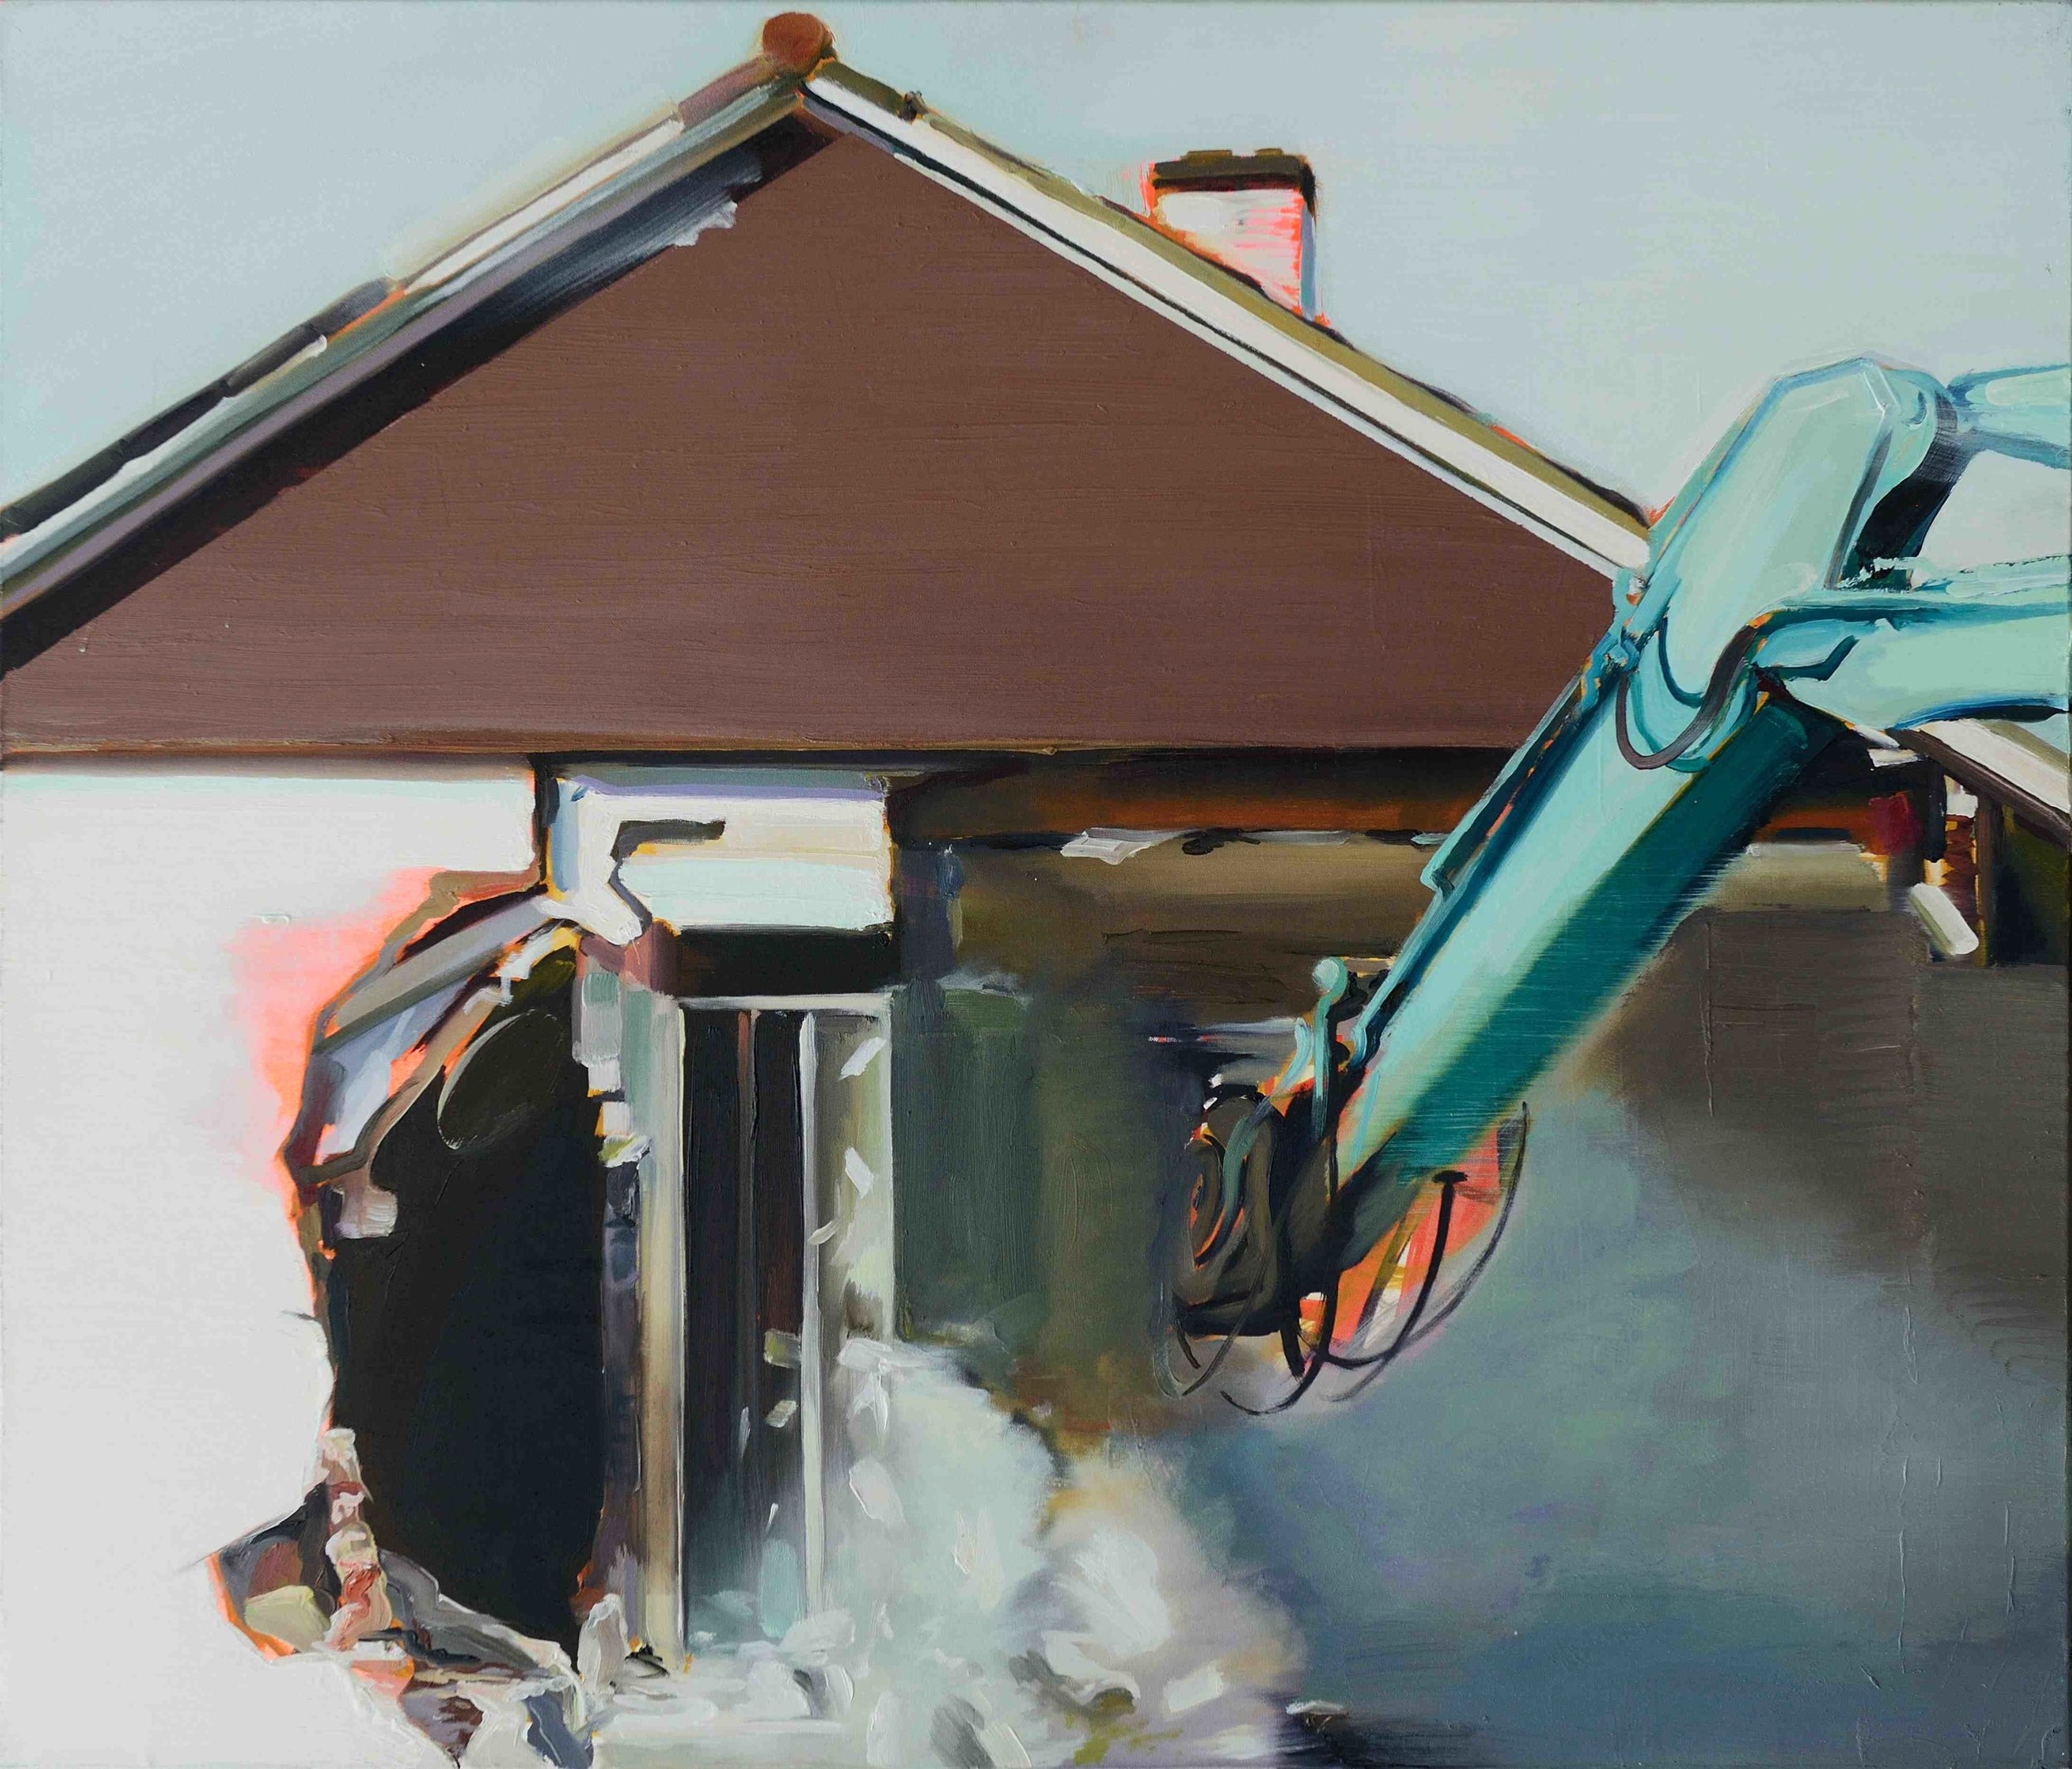   Untitled (Mobile Home) , 2006, oil on canvas, 73 x 86cm. Private collection, France 